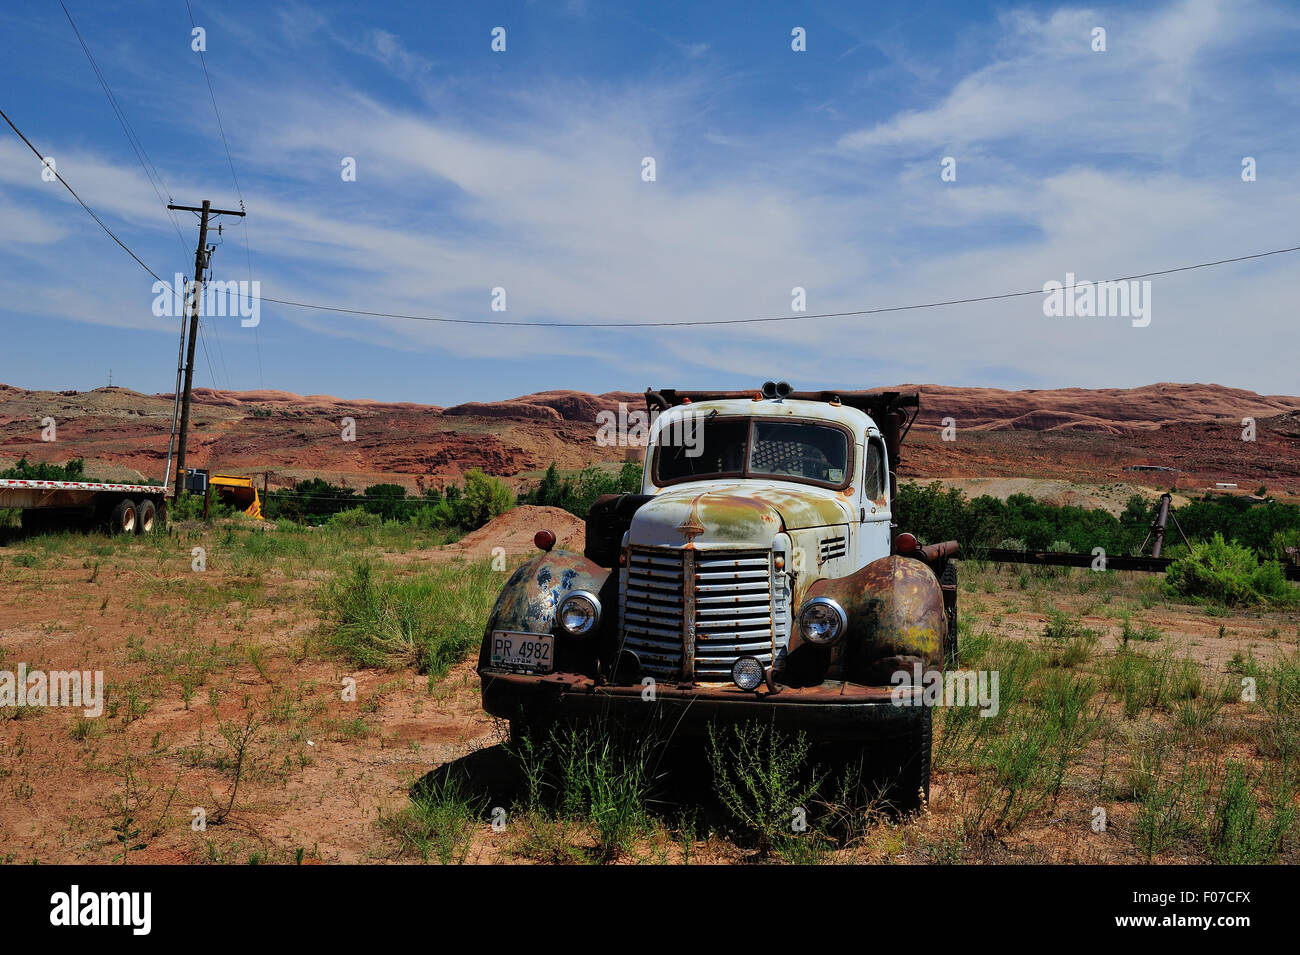 A 1950's International Harvester (IH) truck sits abandoned in a field. Stock Photo